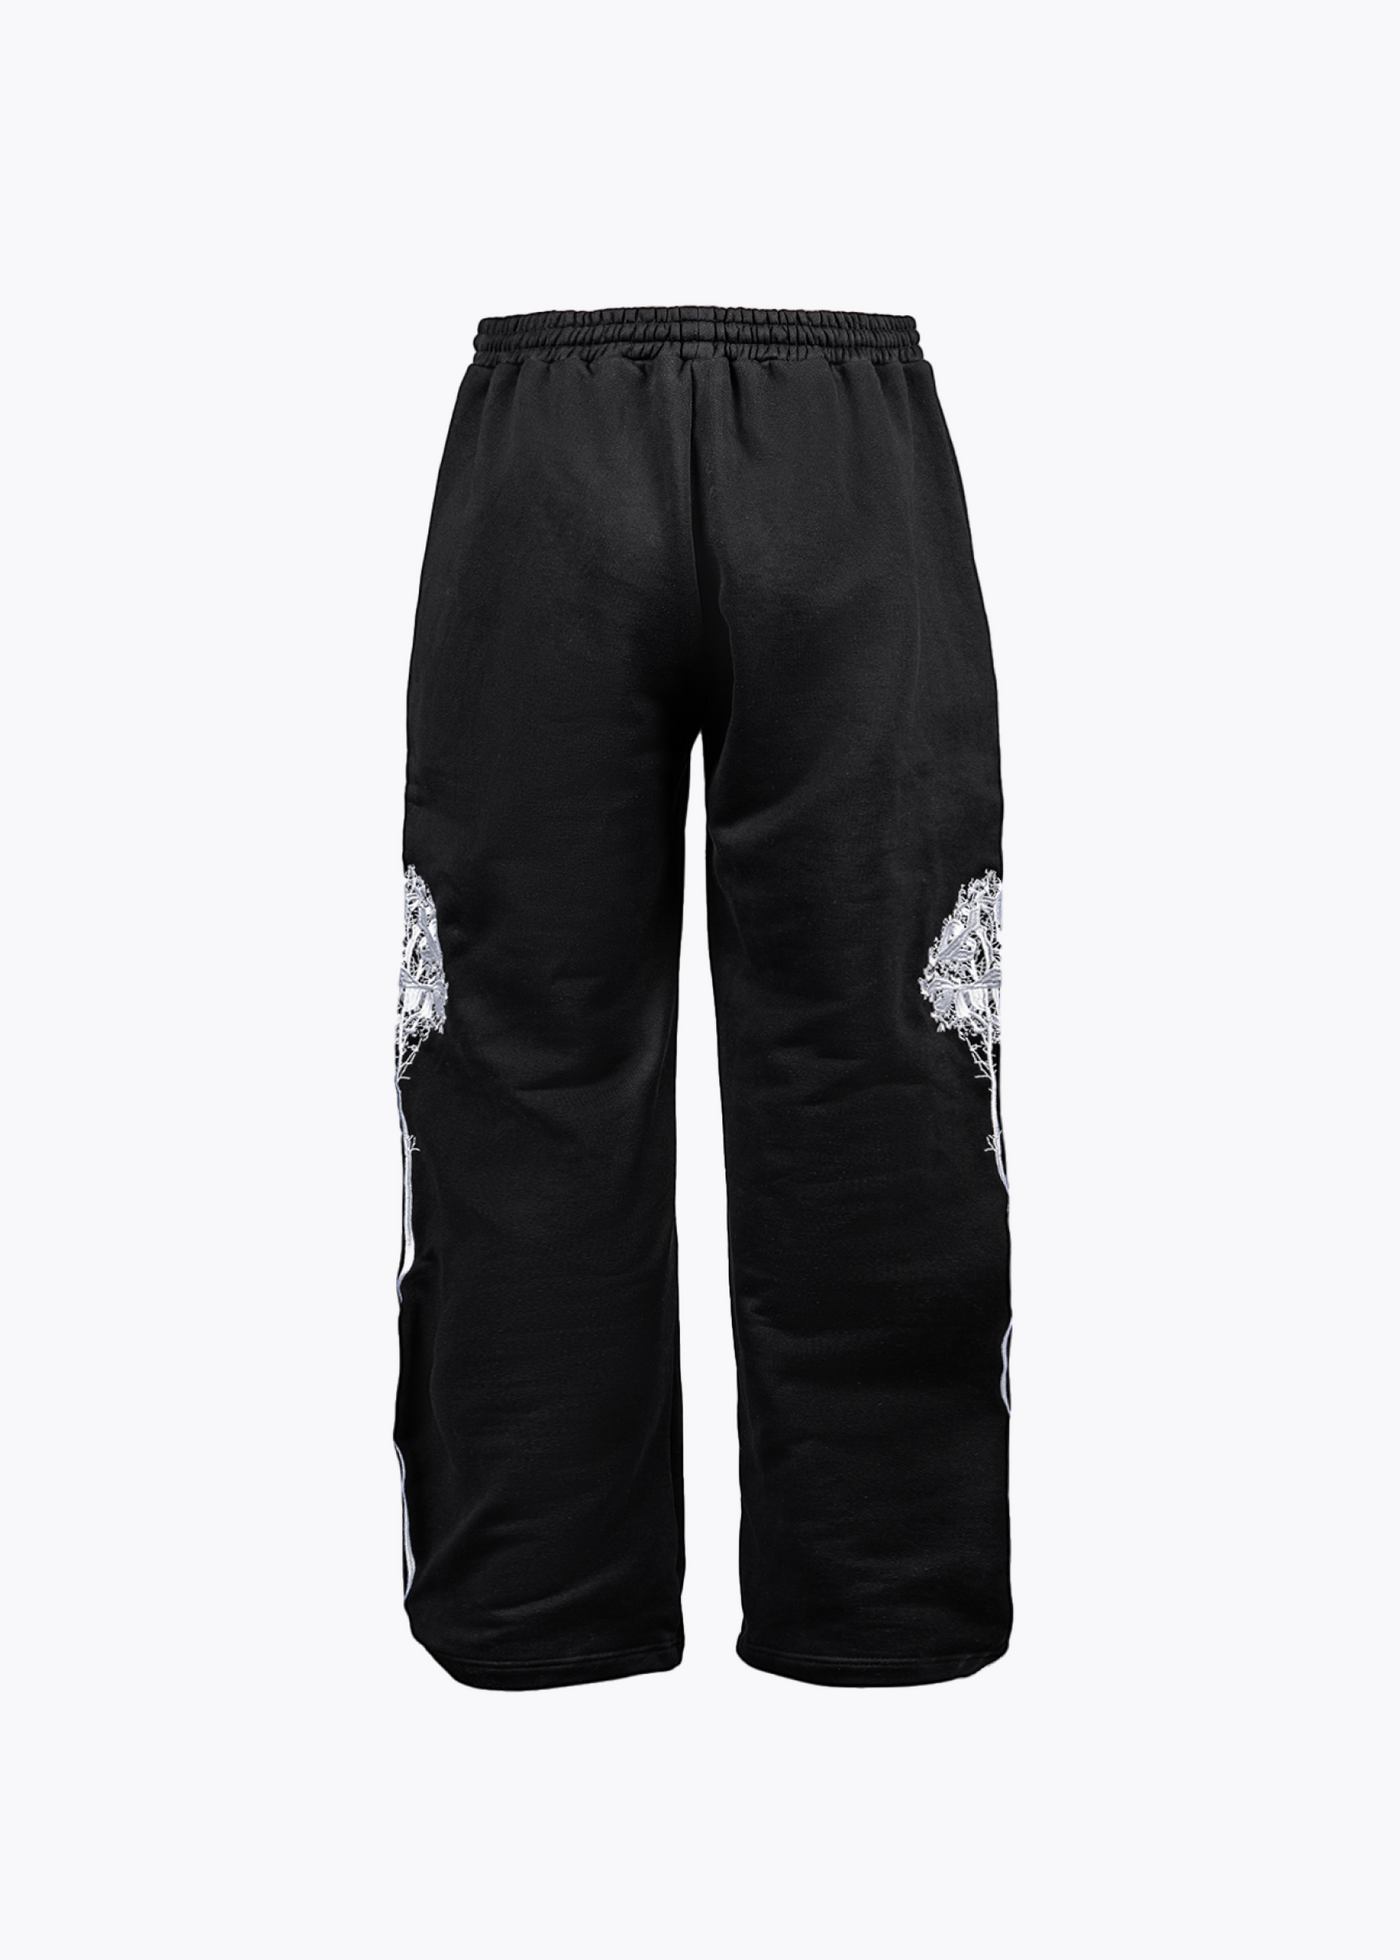 roots sweatpants outfit  Roots sweatpants outfit, Roots